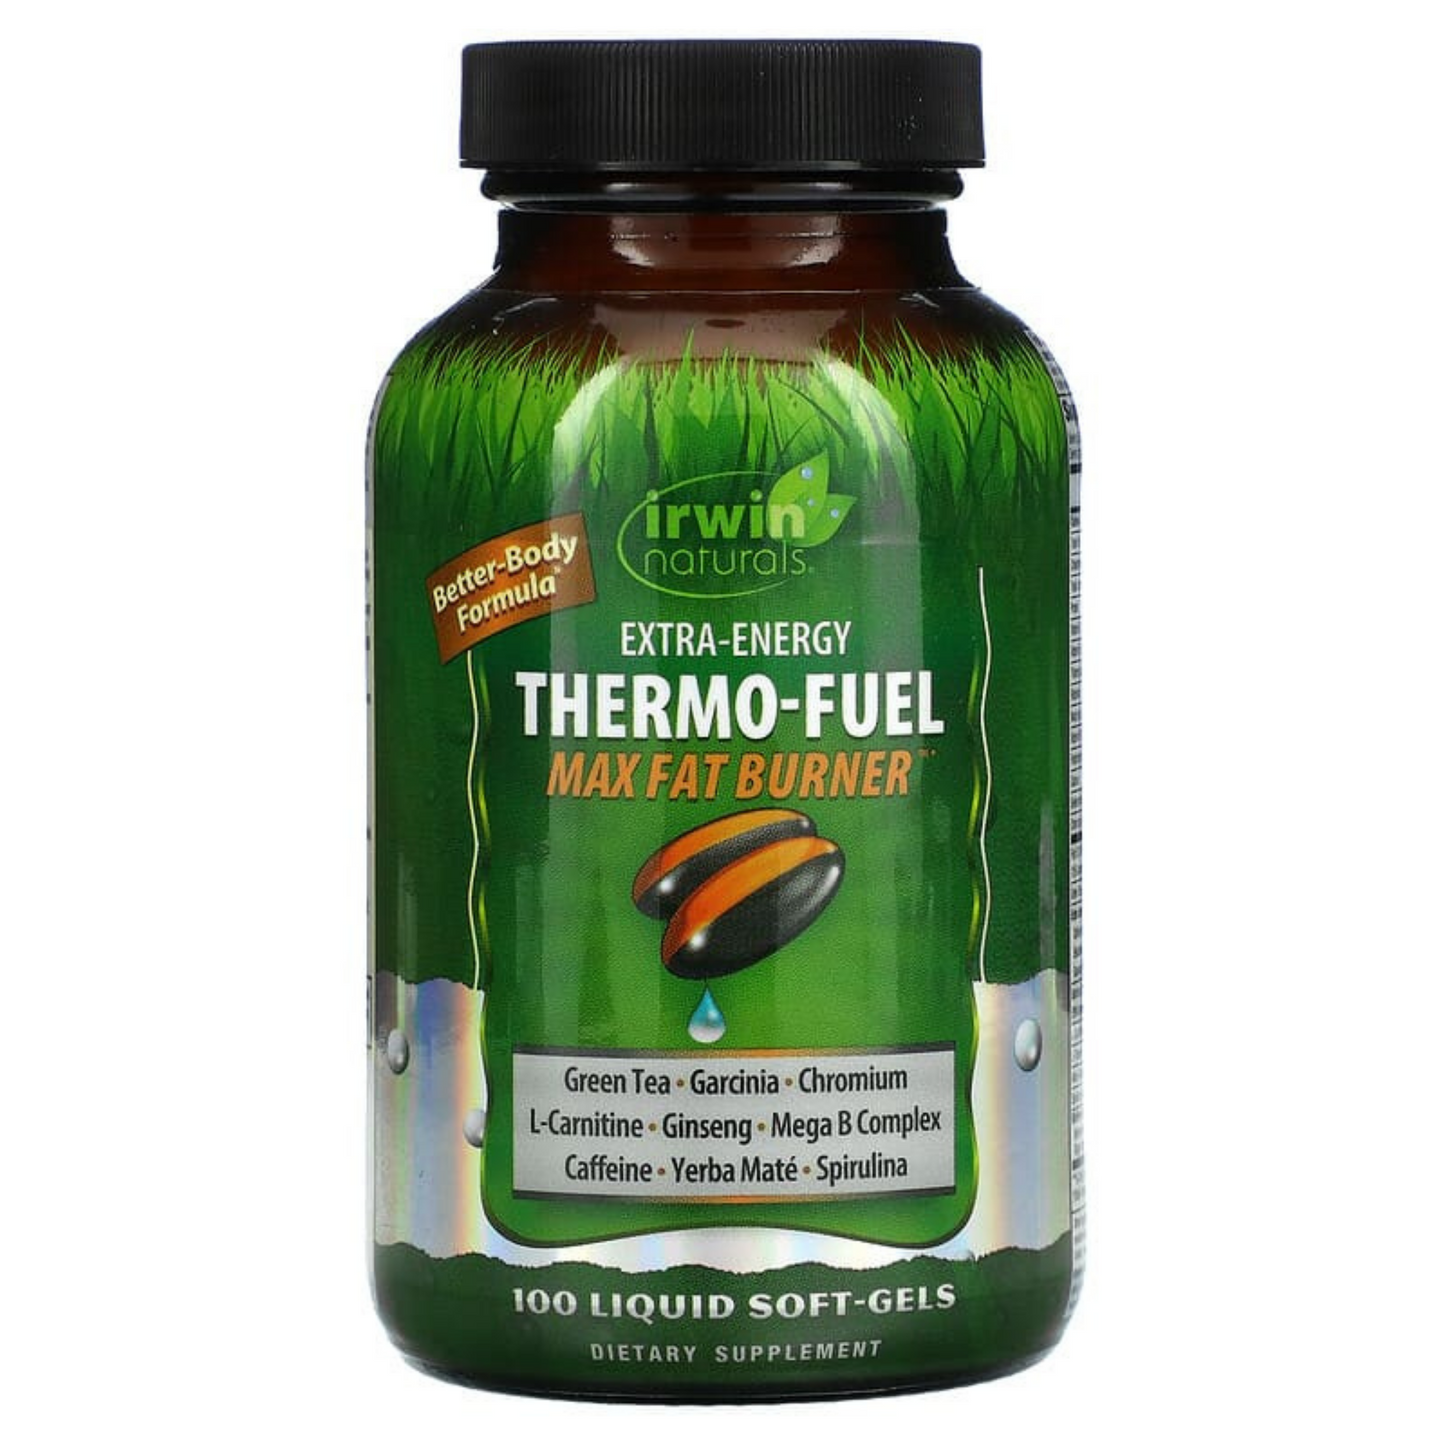 Primary Image of Thermo-Fuel Max Fat Burner Soft Gels